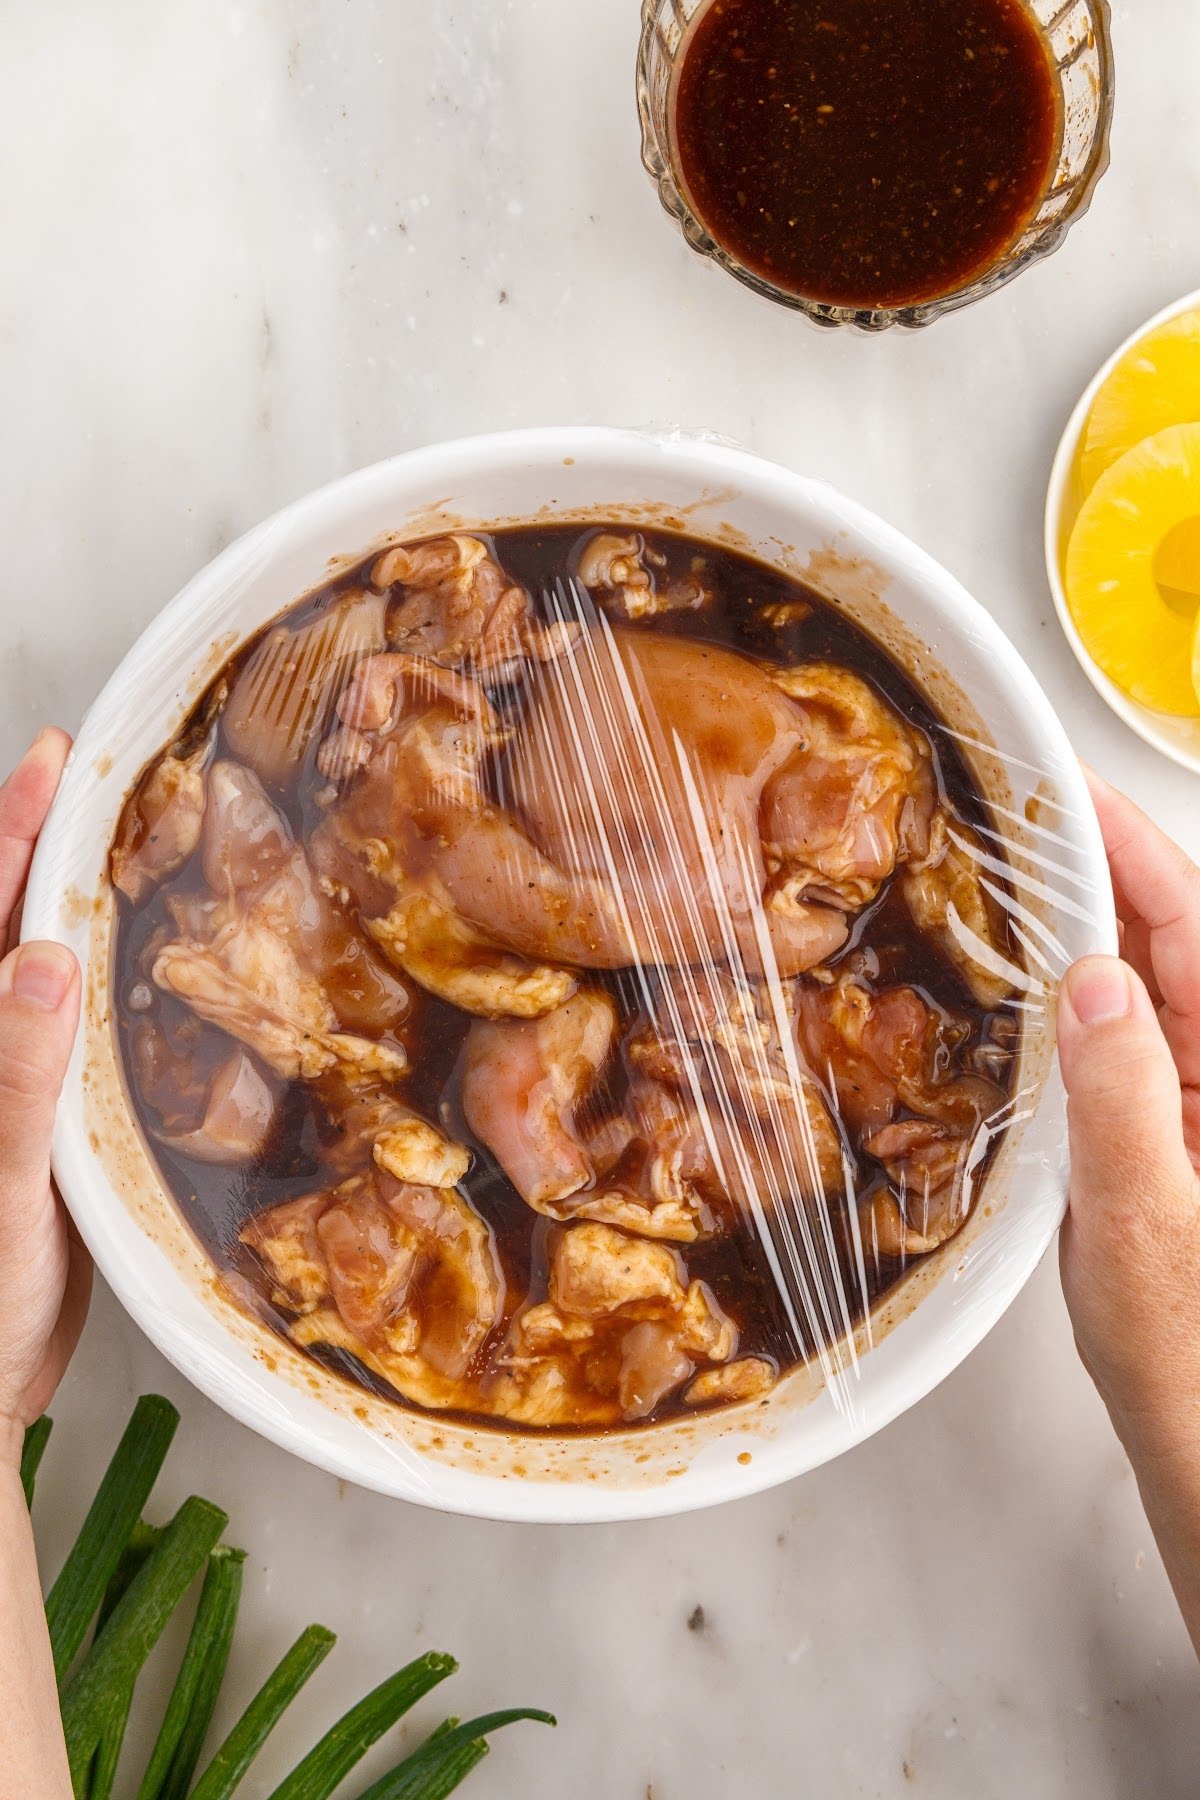 Huli Huli Chicken in a bowl of marinade with saran wrap placed on top.